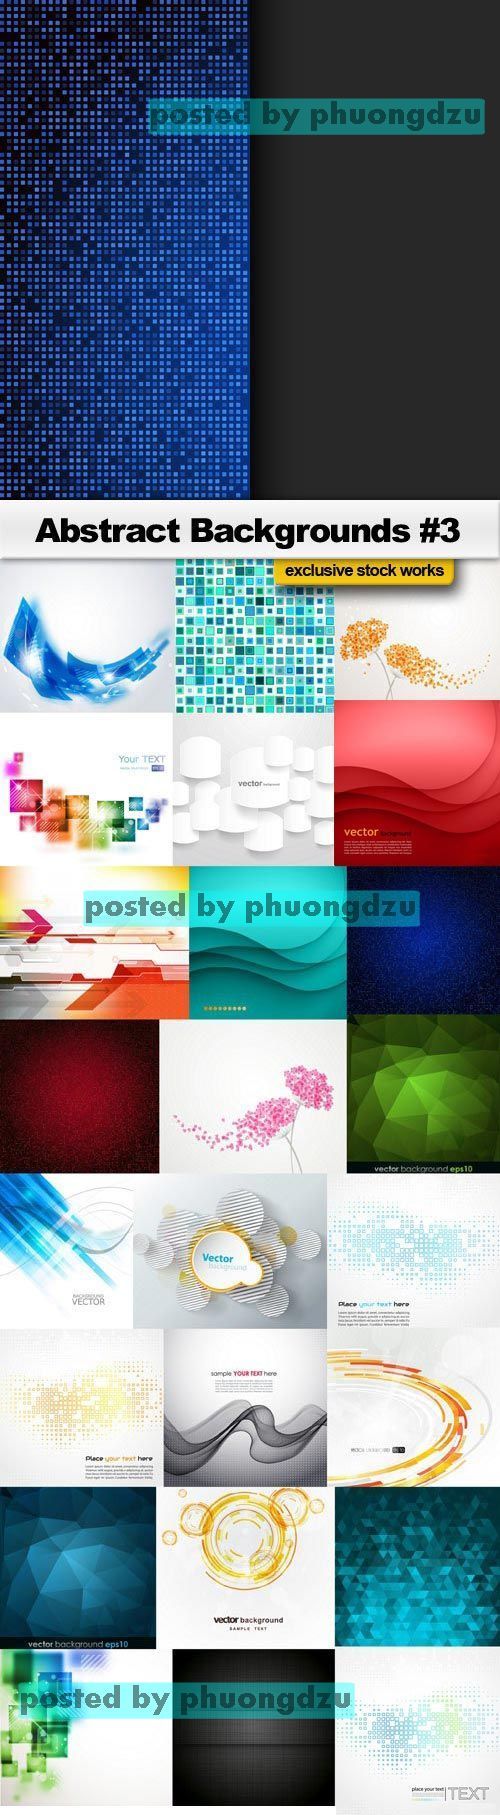 Abstract Backgrounds Vector part 03